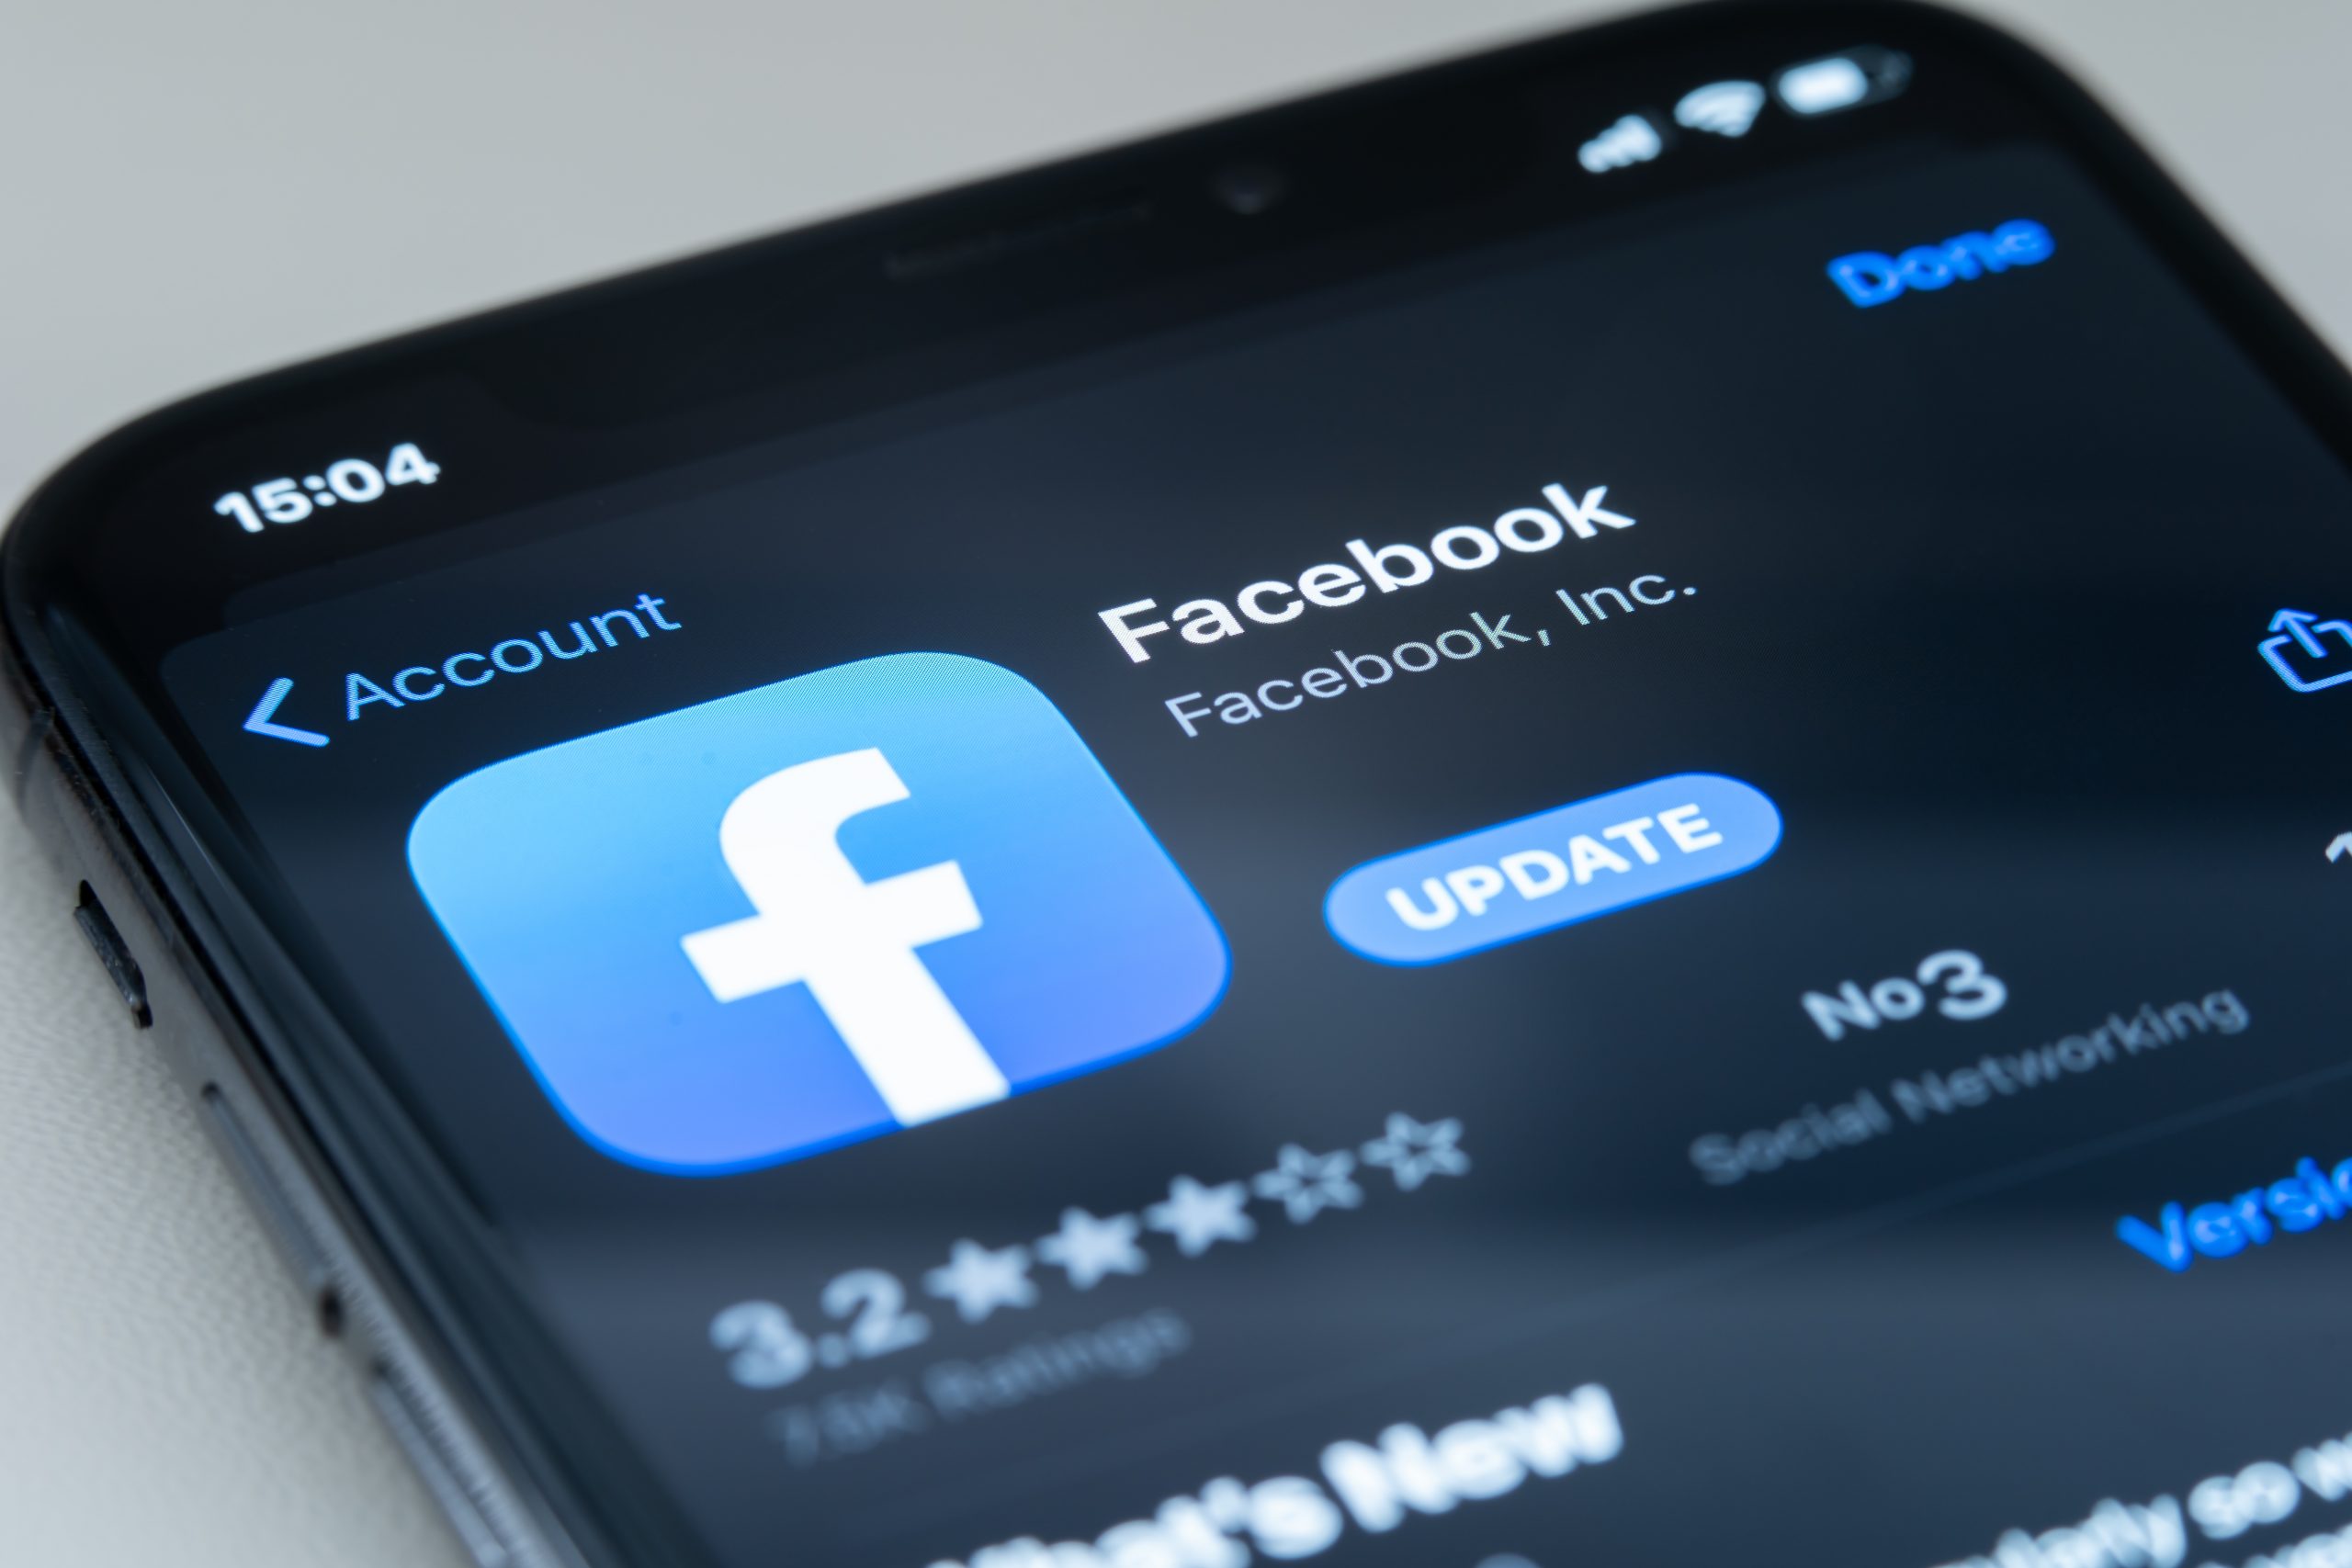 If Facebook ads are a part of your marketing campaign, you may already be preparing for how Apple’s iOS 14 is going to impact them.